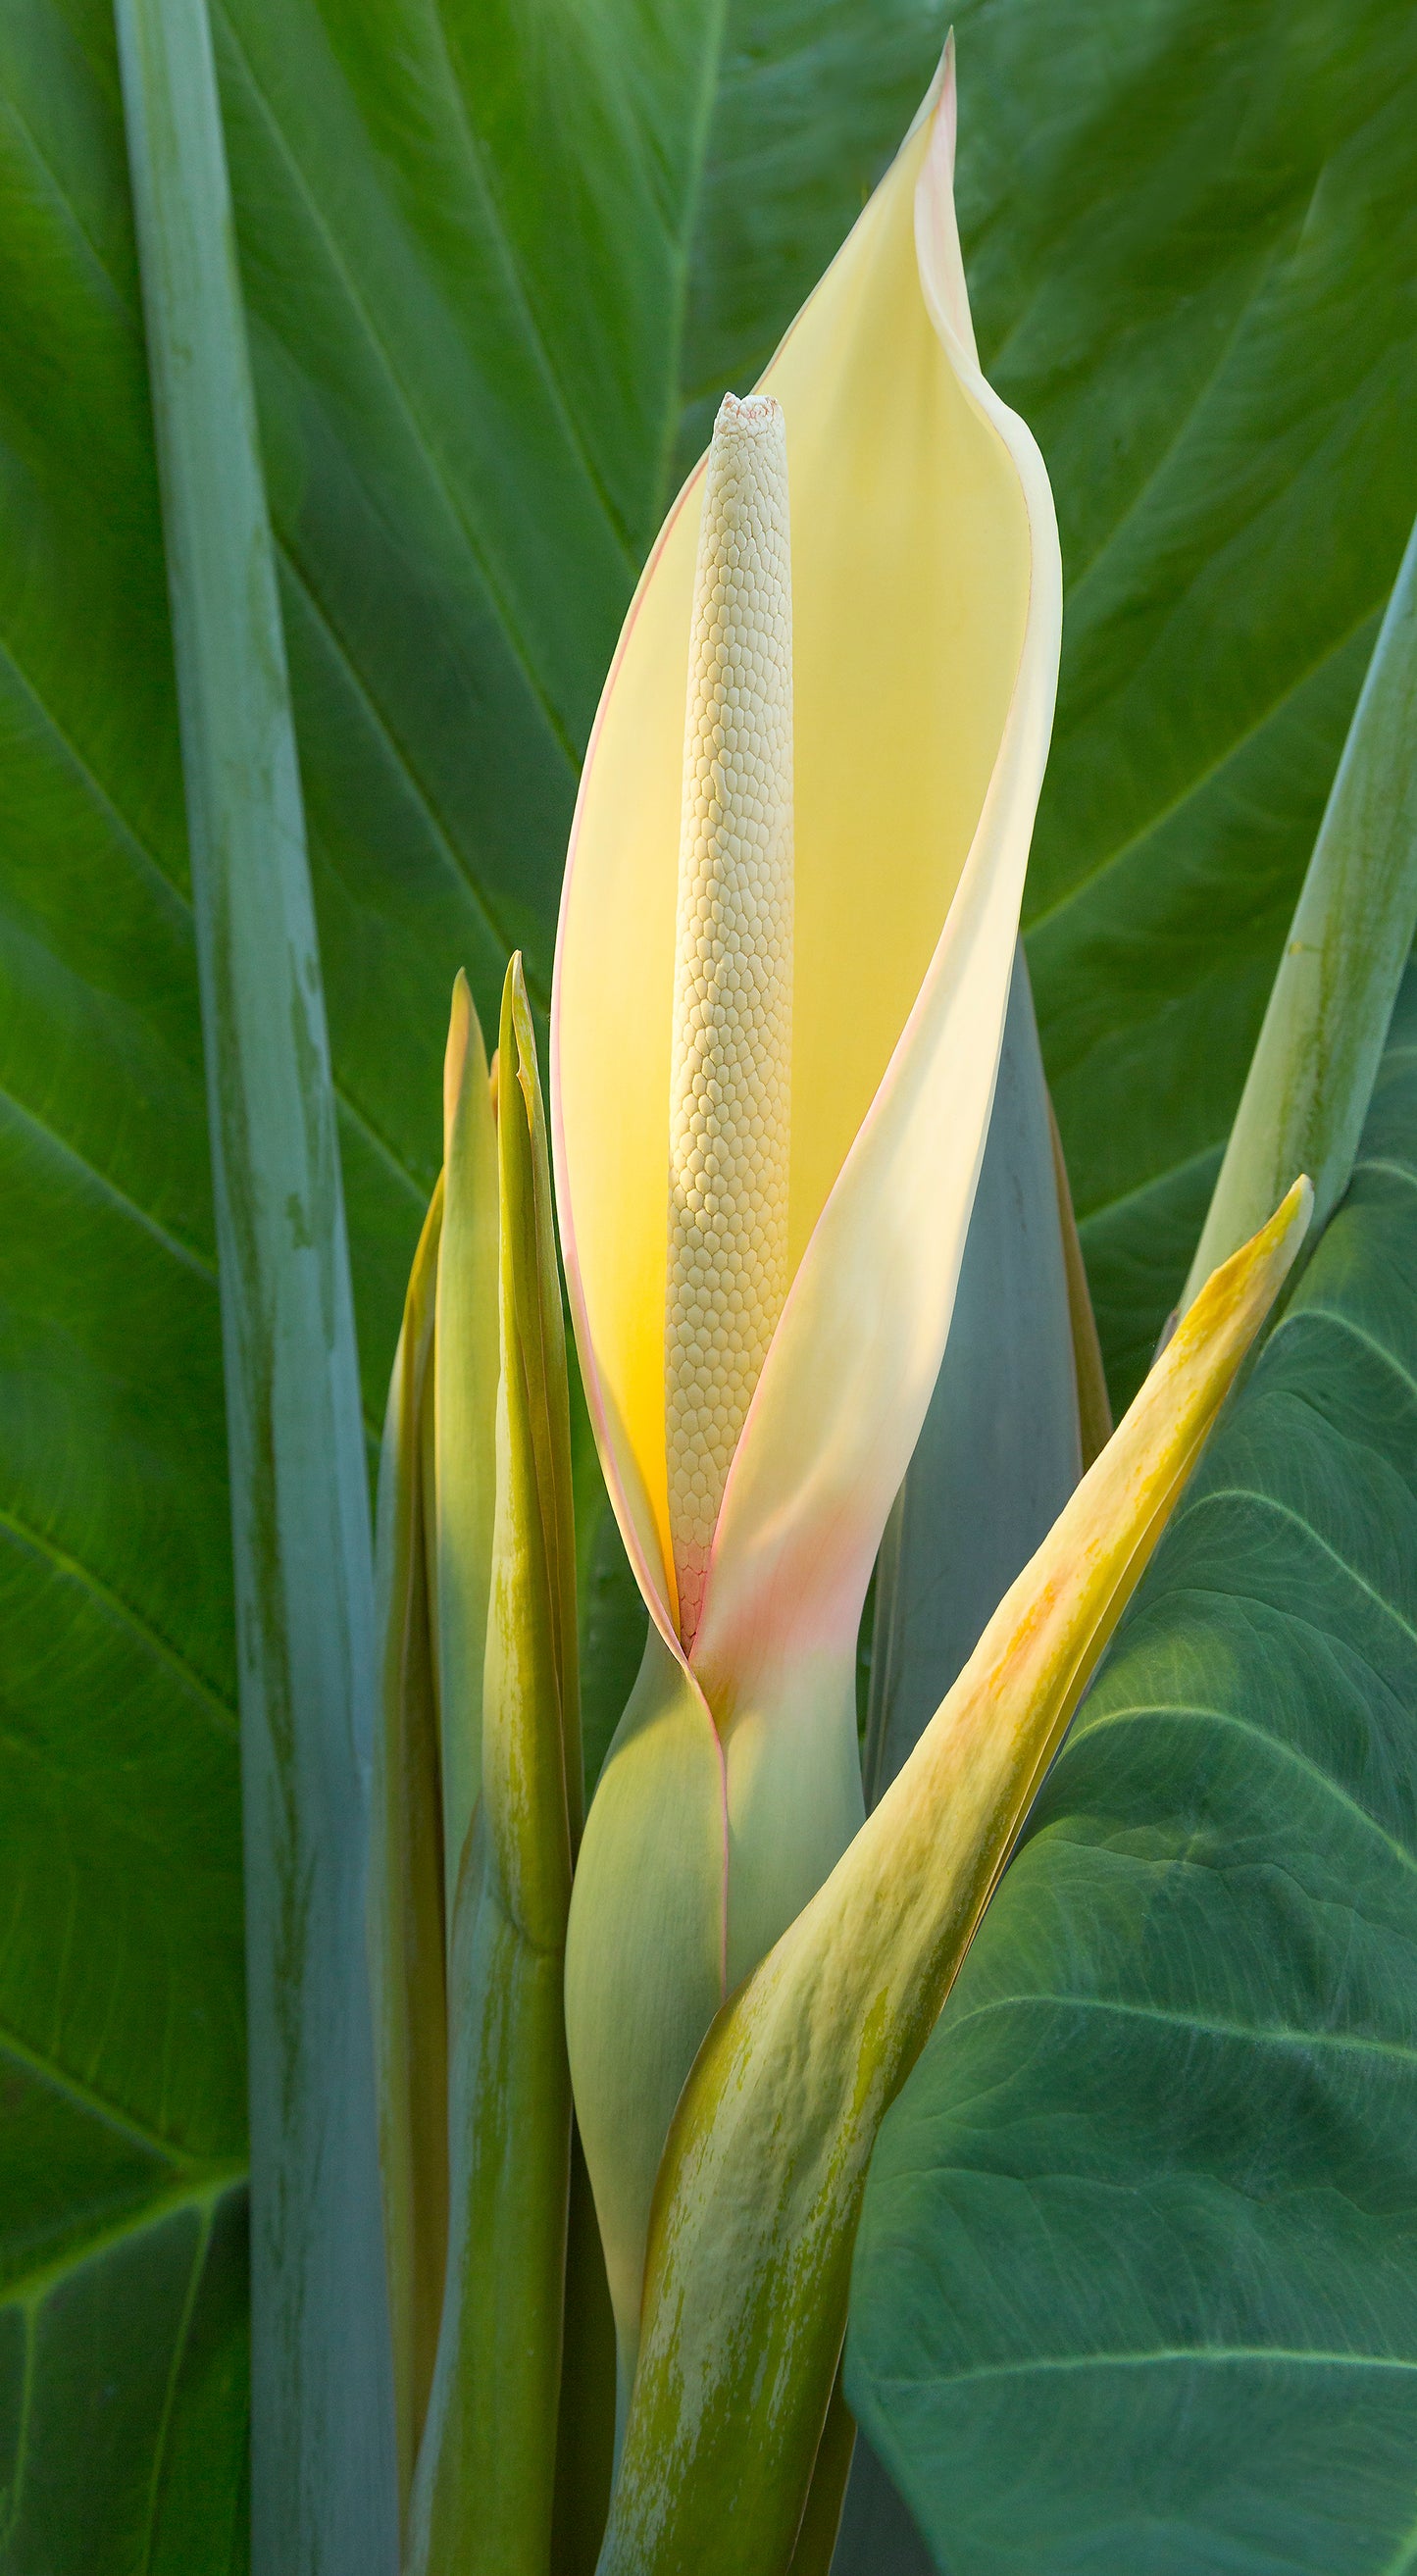 A fine art photograph of a pastel yellow taro flower with green leaves in the background. Outdoor and landscape photography on Kauai by Inspiring Images Hawaii.